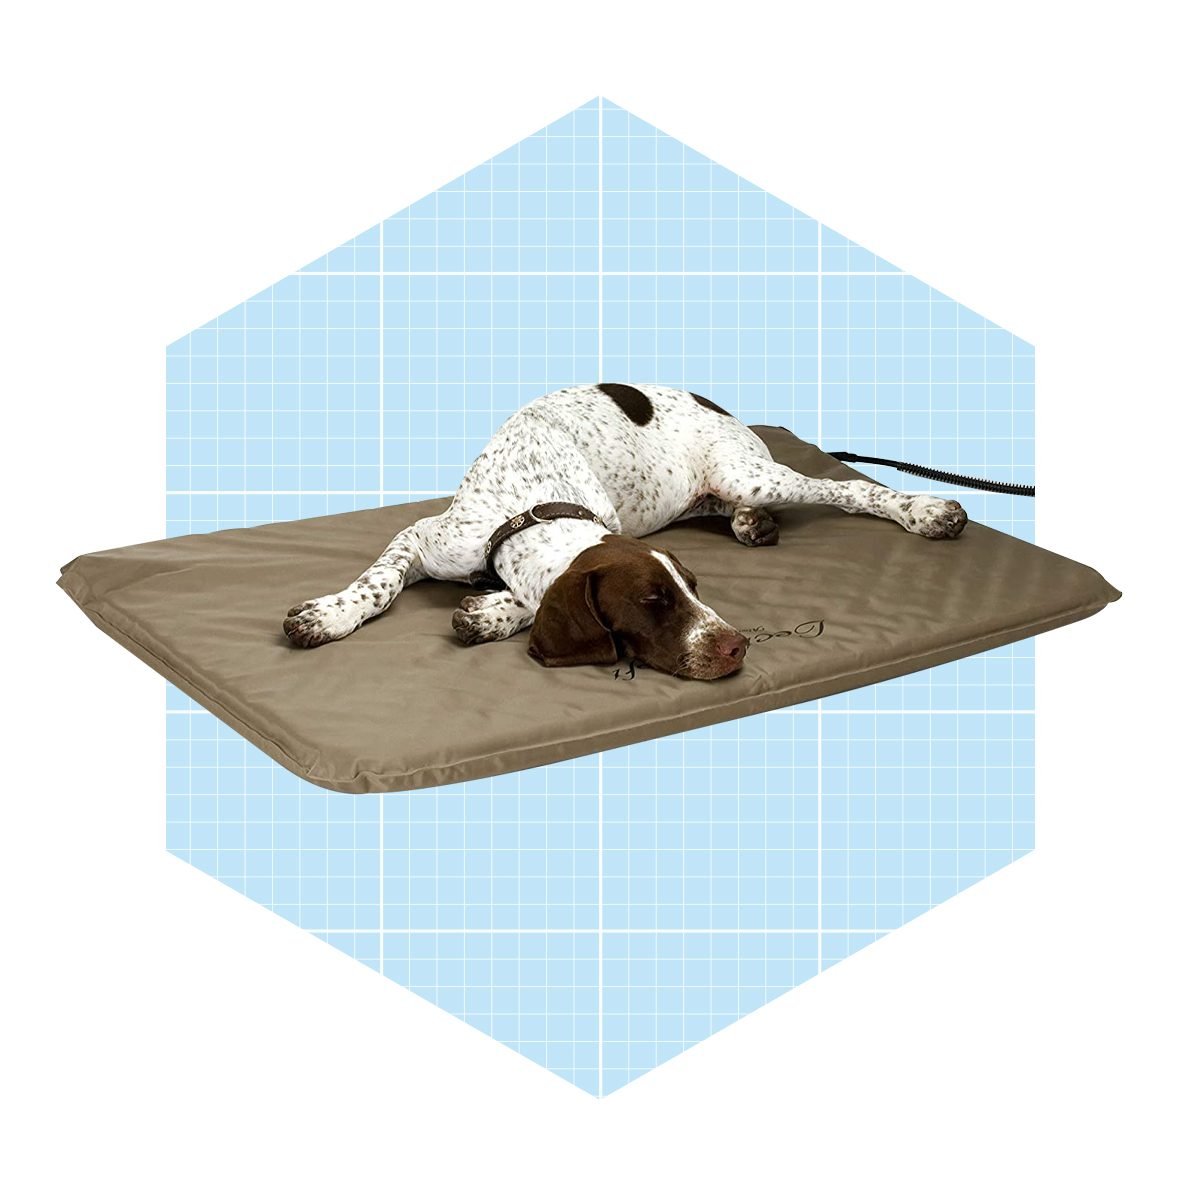 K&h Pet Products Lectro Soft Outdoor Heated Pet Bed Ecomm Amazon.com